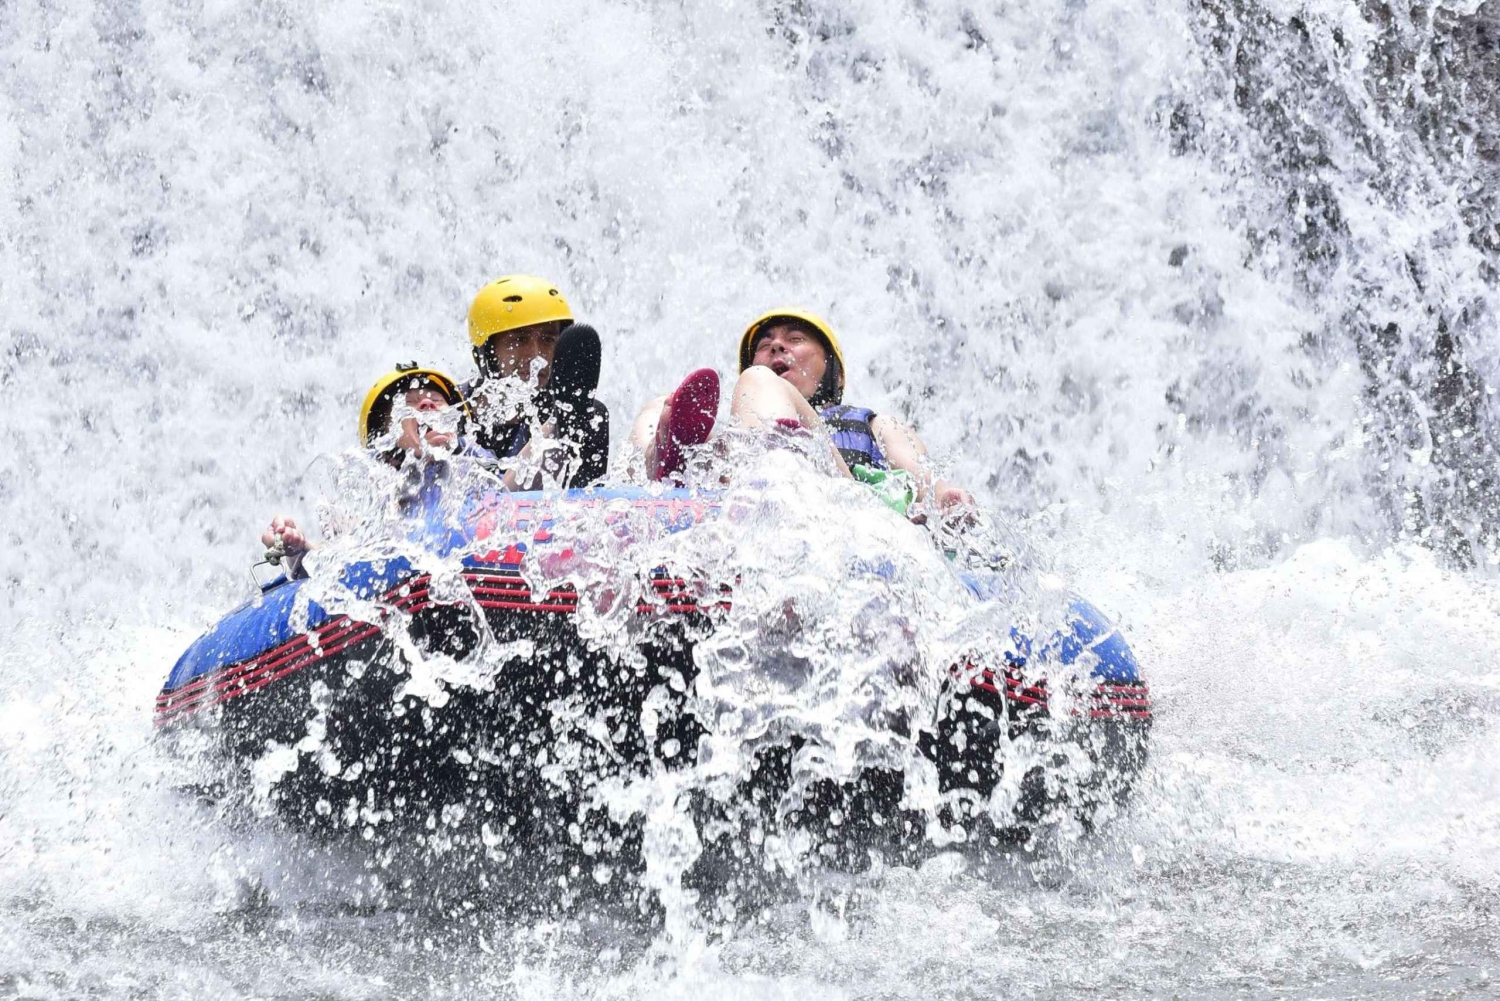 Bali: Sidemen White Water Rafting with No Stairs Adventures